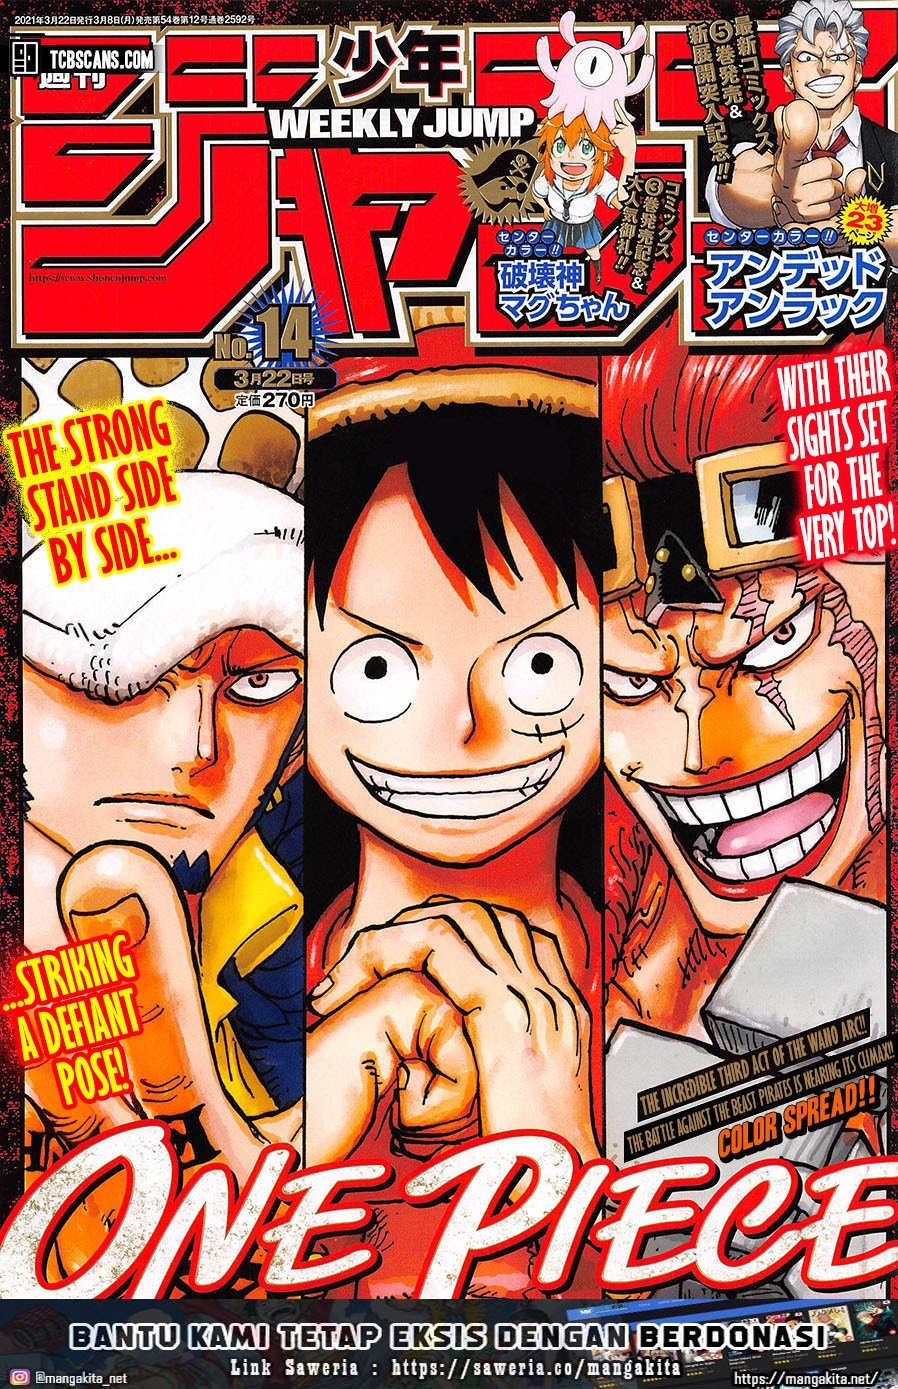 One Piece Chapter 1006 Hq - 123